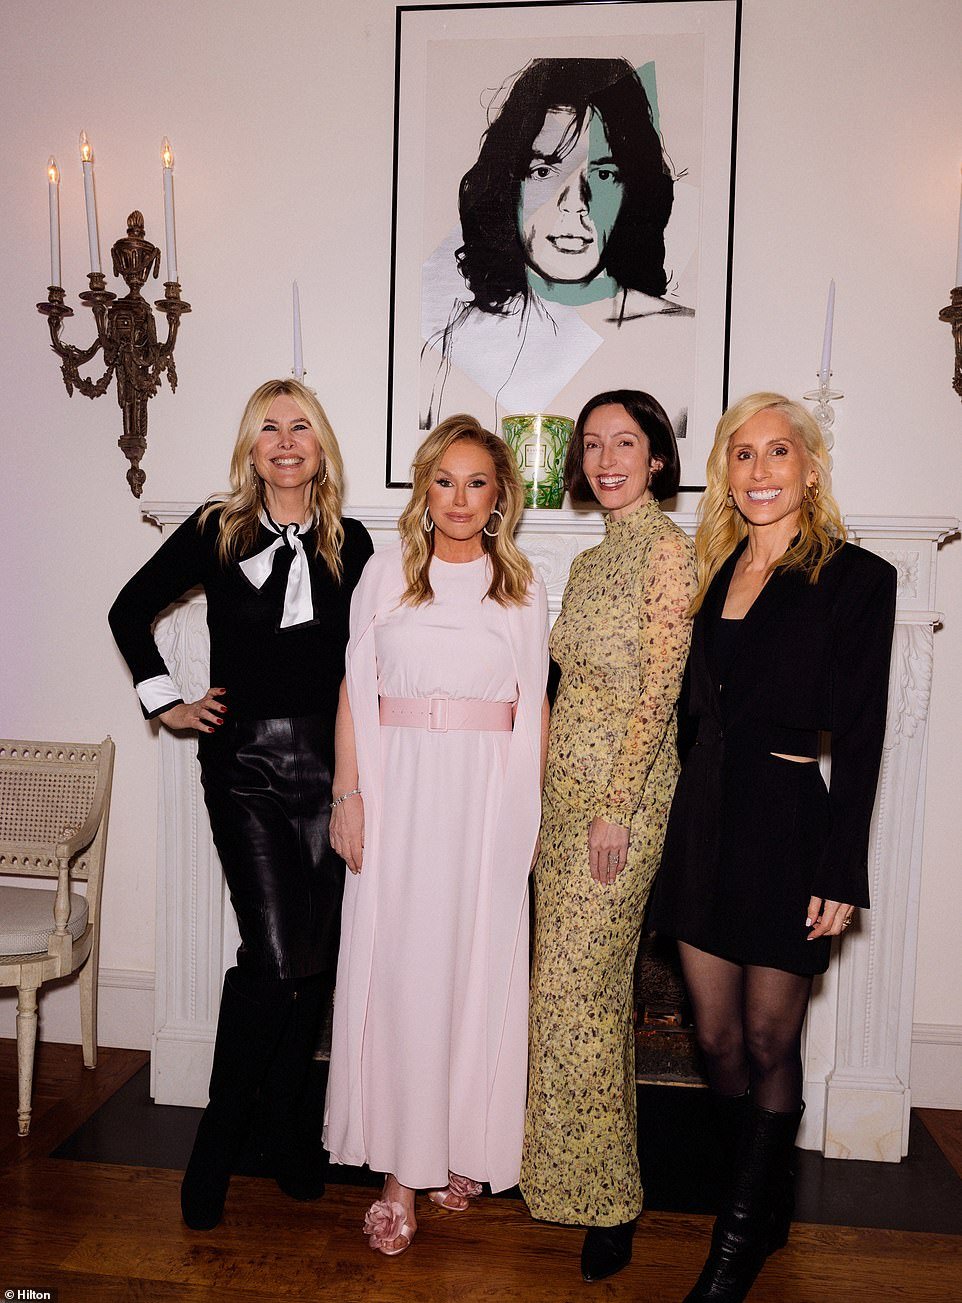 Kathy and her friends (from left) Irena, Zoe de Givenchy and Alexandra von Furstenberg stood in front of a photo of Mick Jagger